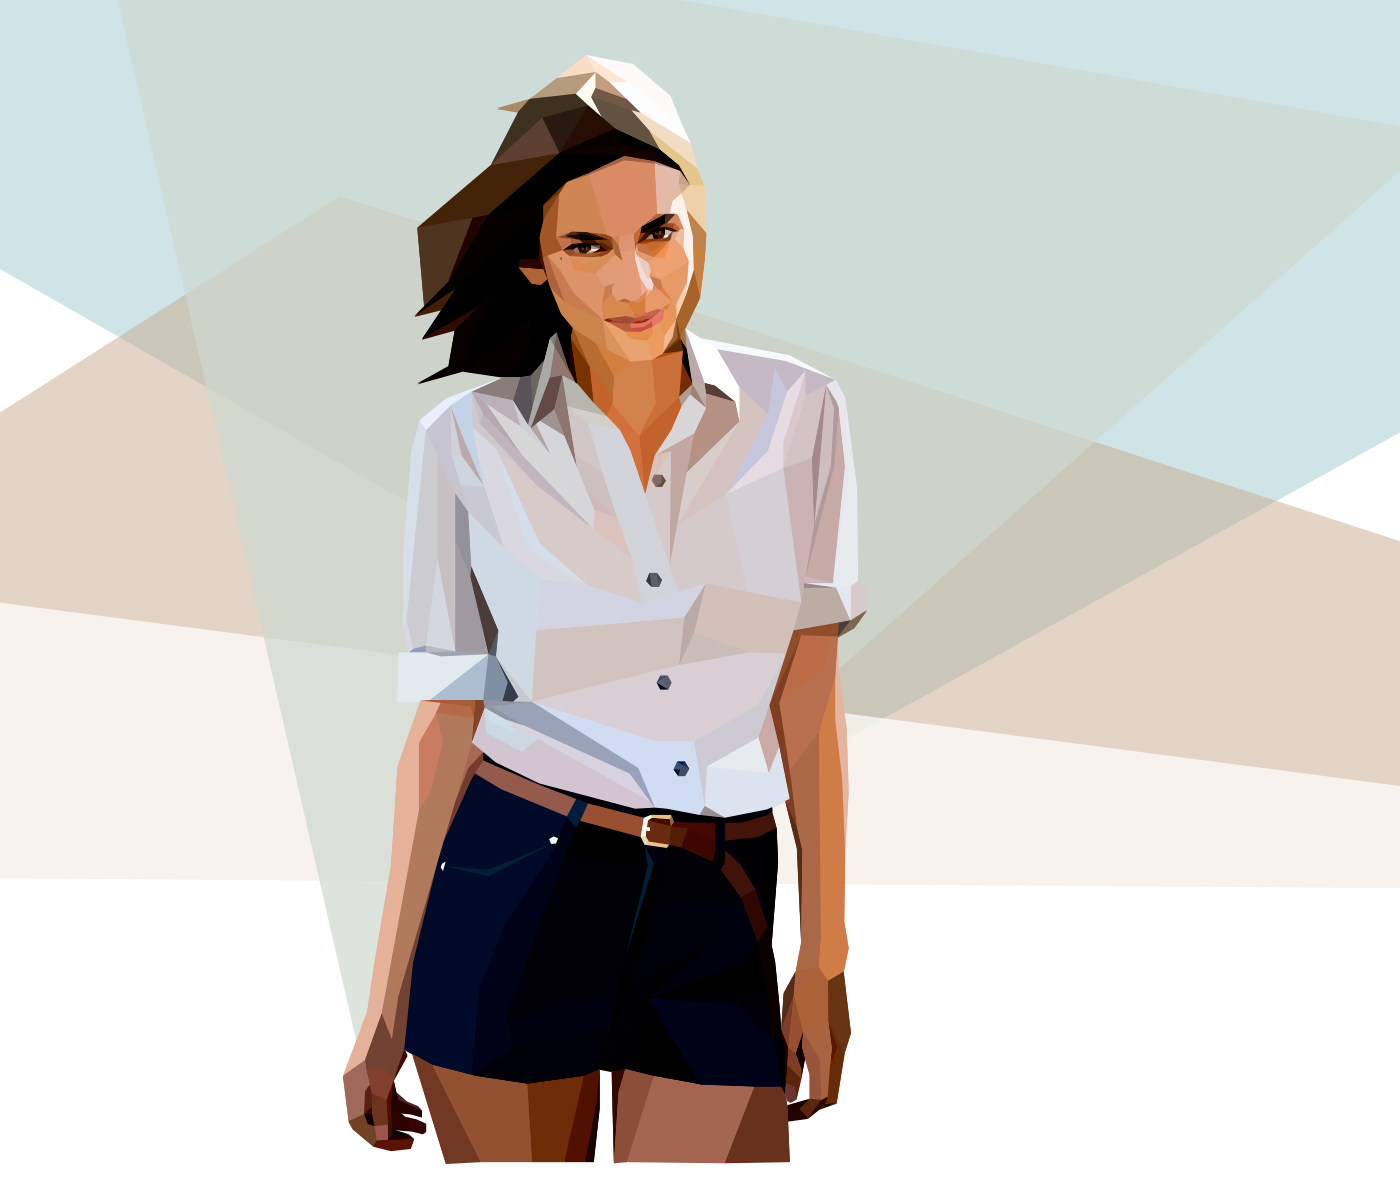 portaits caracters design lowpoly Low Poly personnages